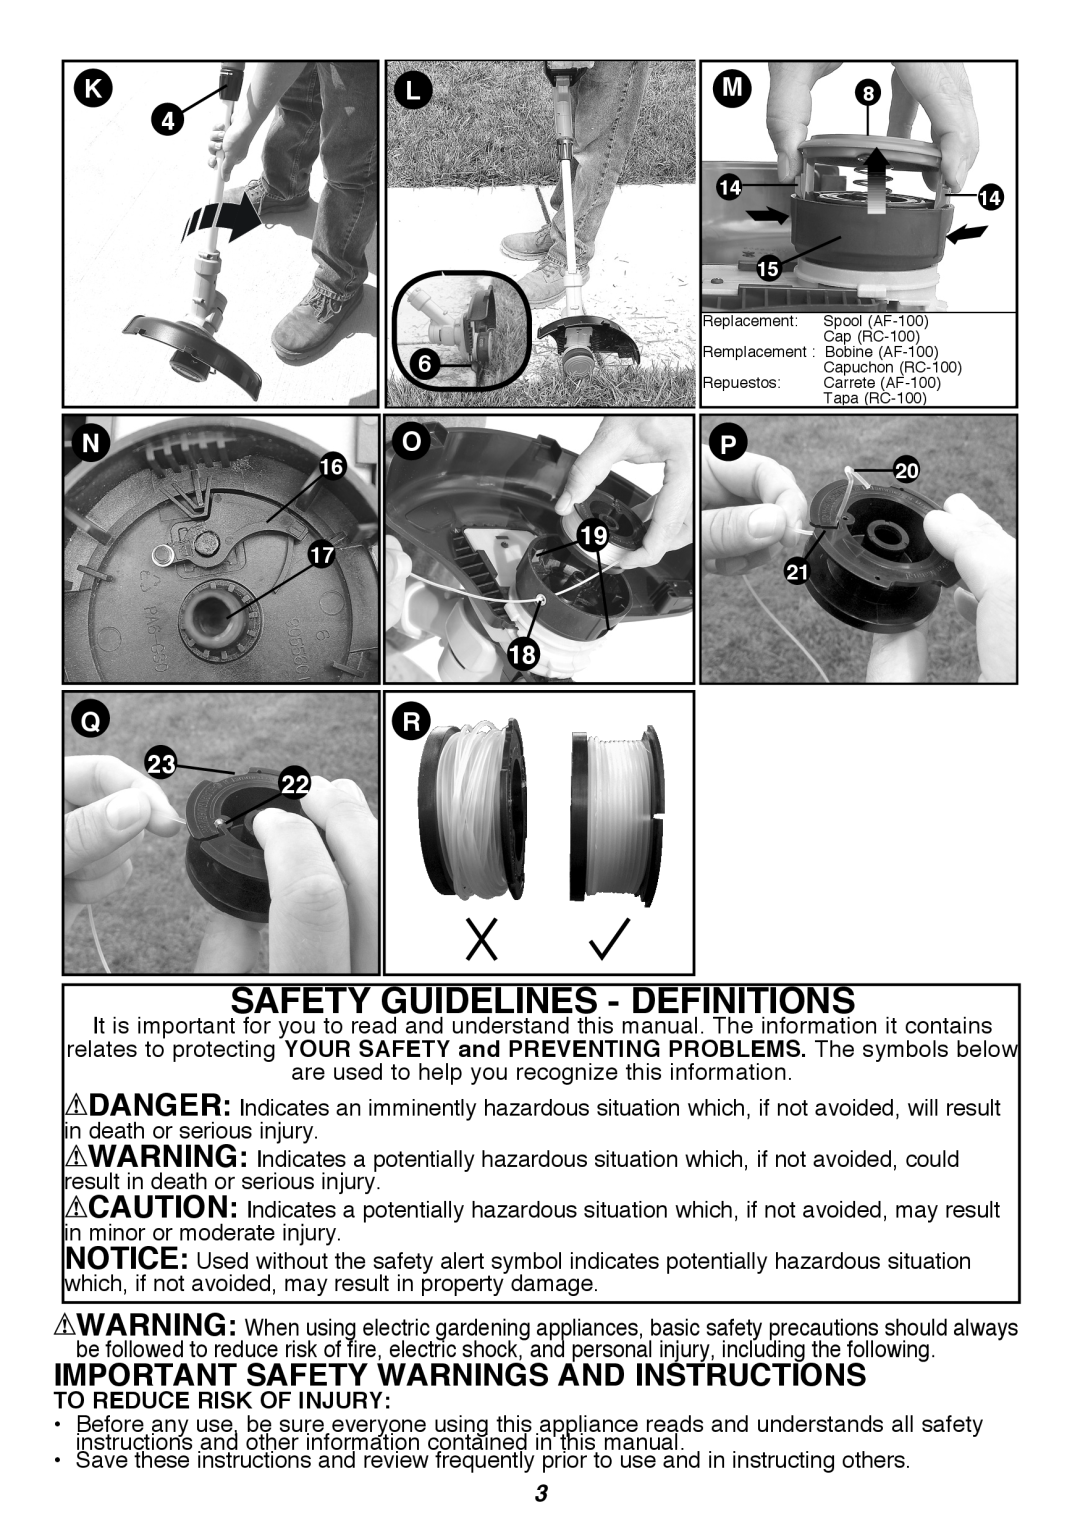 Black & Decker LST300R Safety Guidelines - Definitions, Important Safety Warnings And Instructions, K 4 N, O 